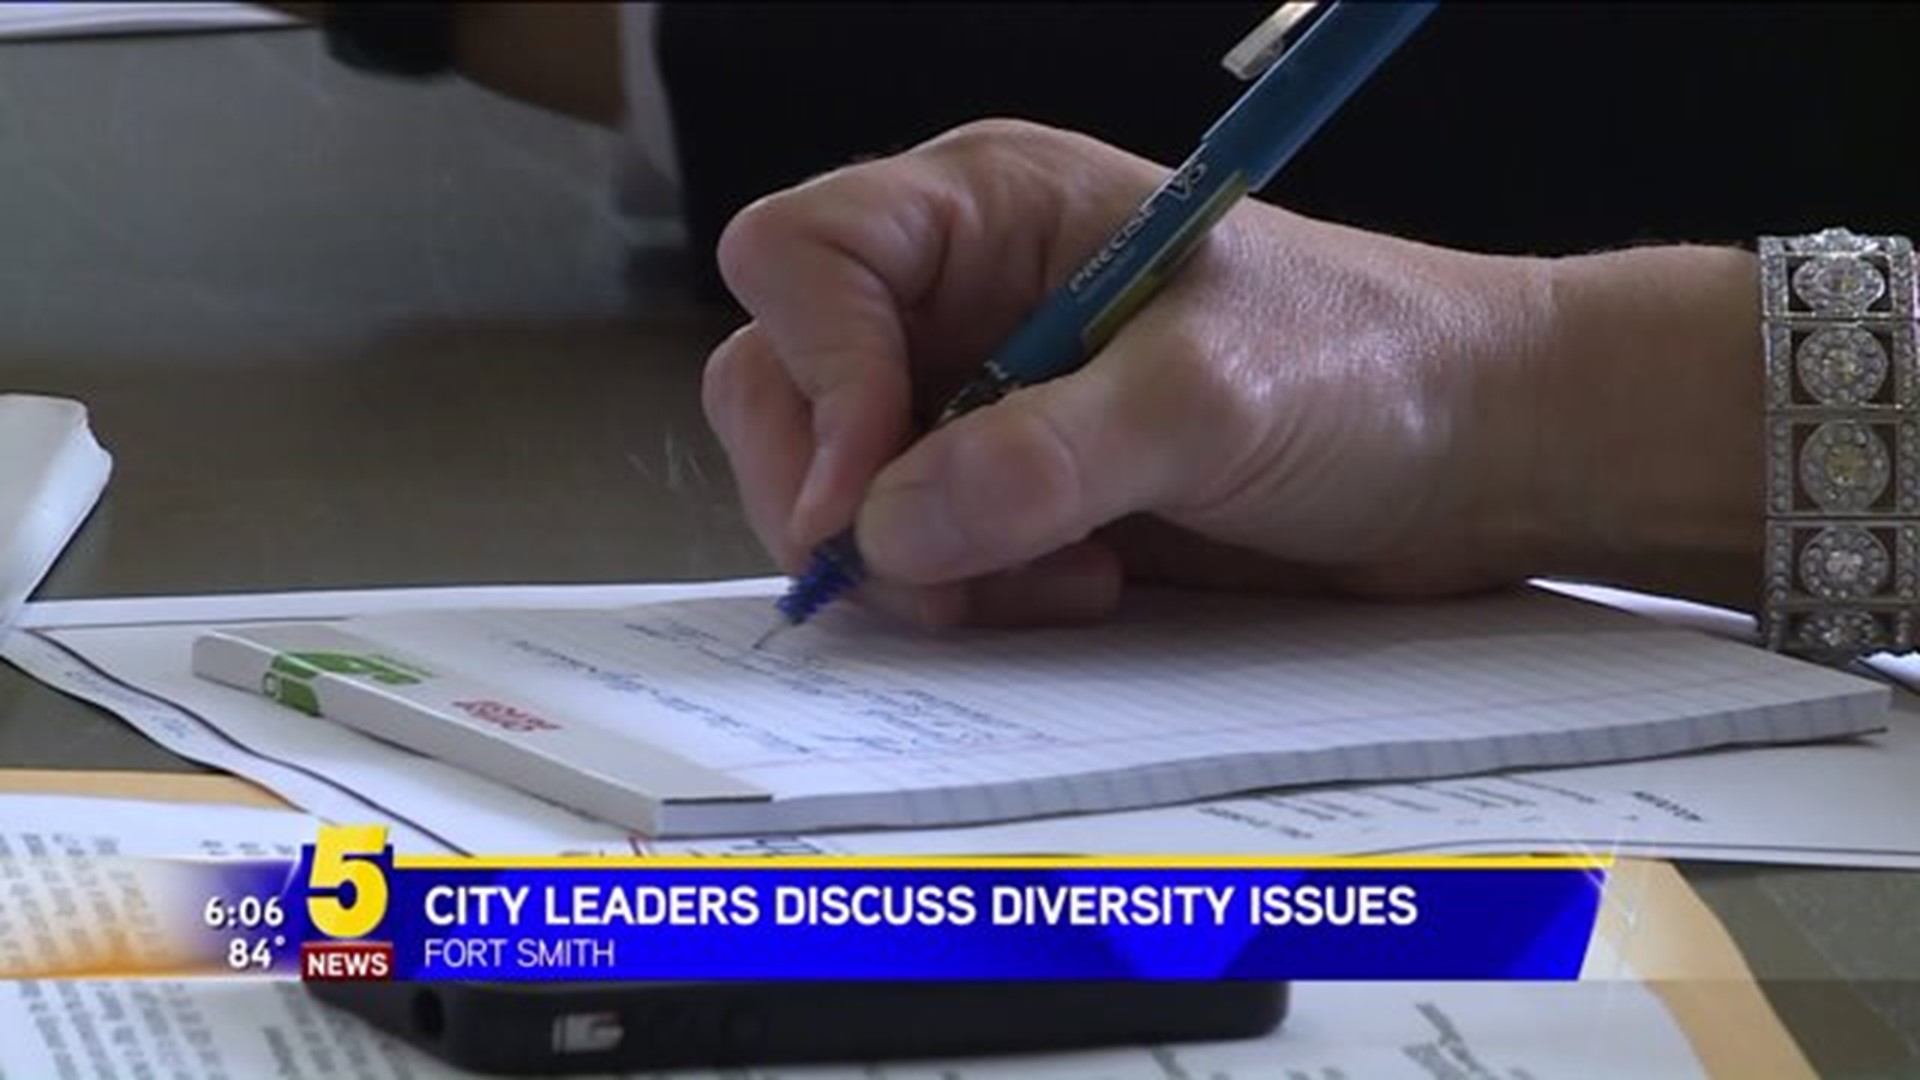 City Leaders Discuss Diversity Issues